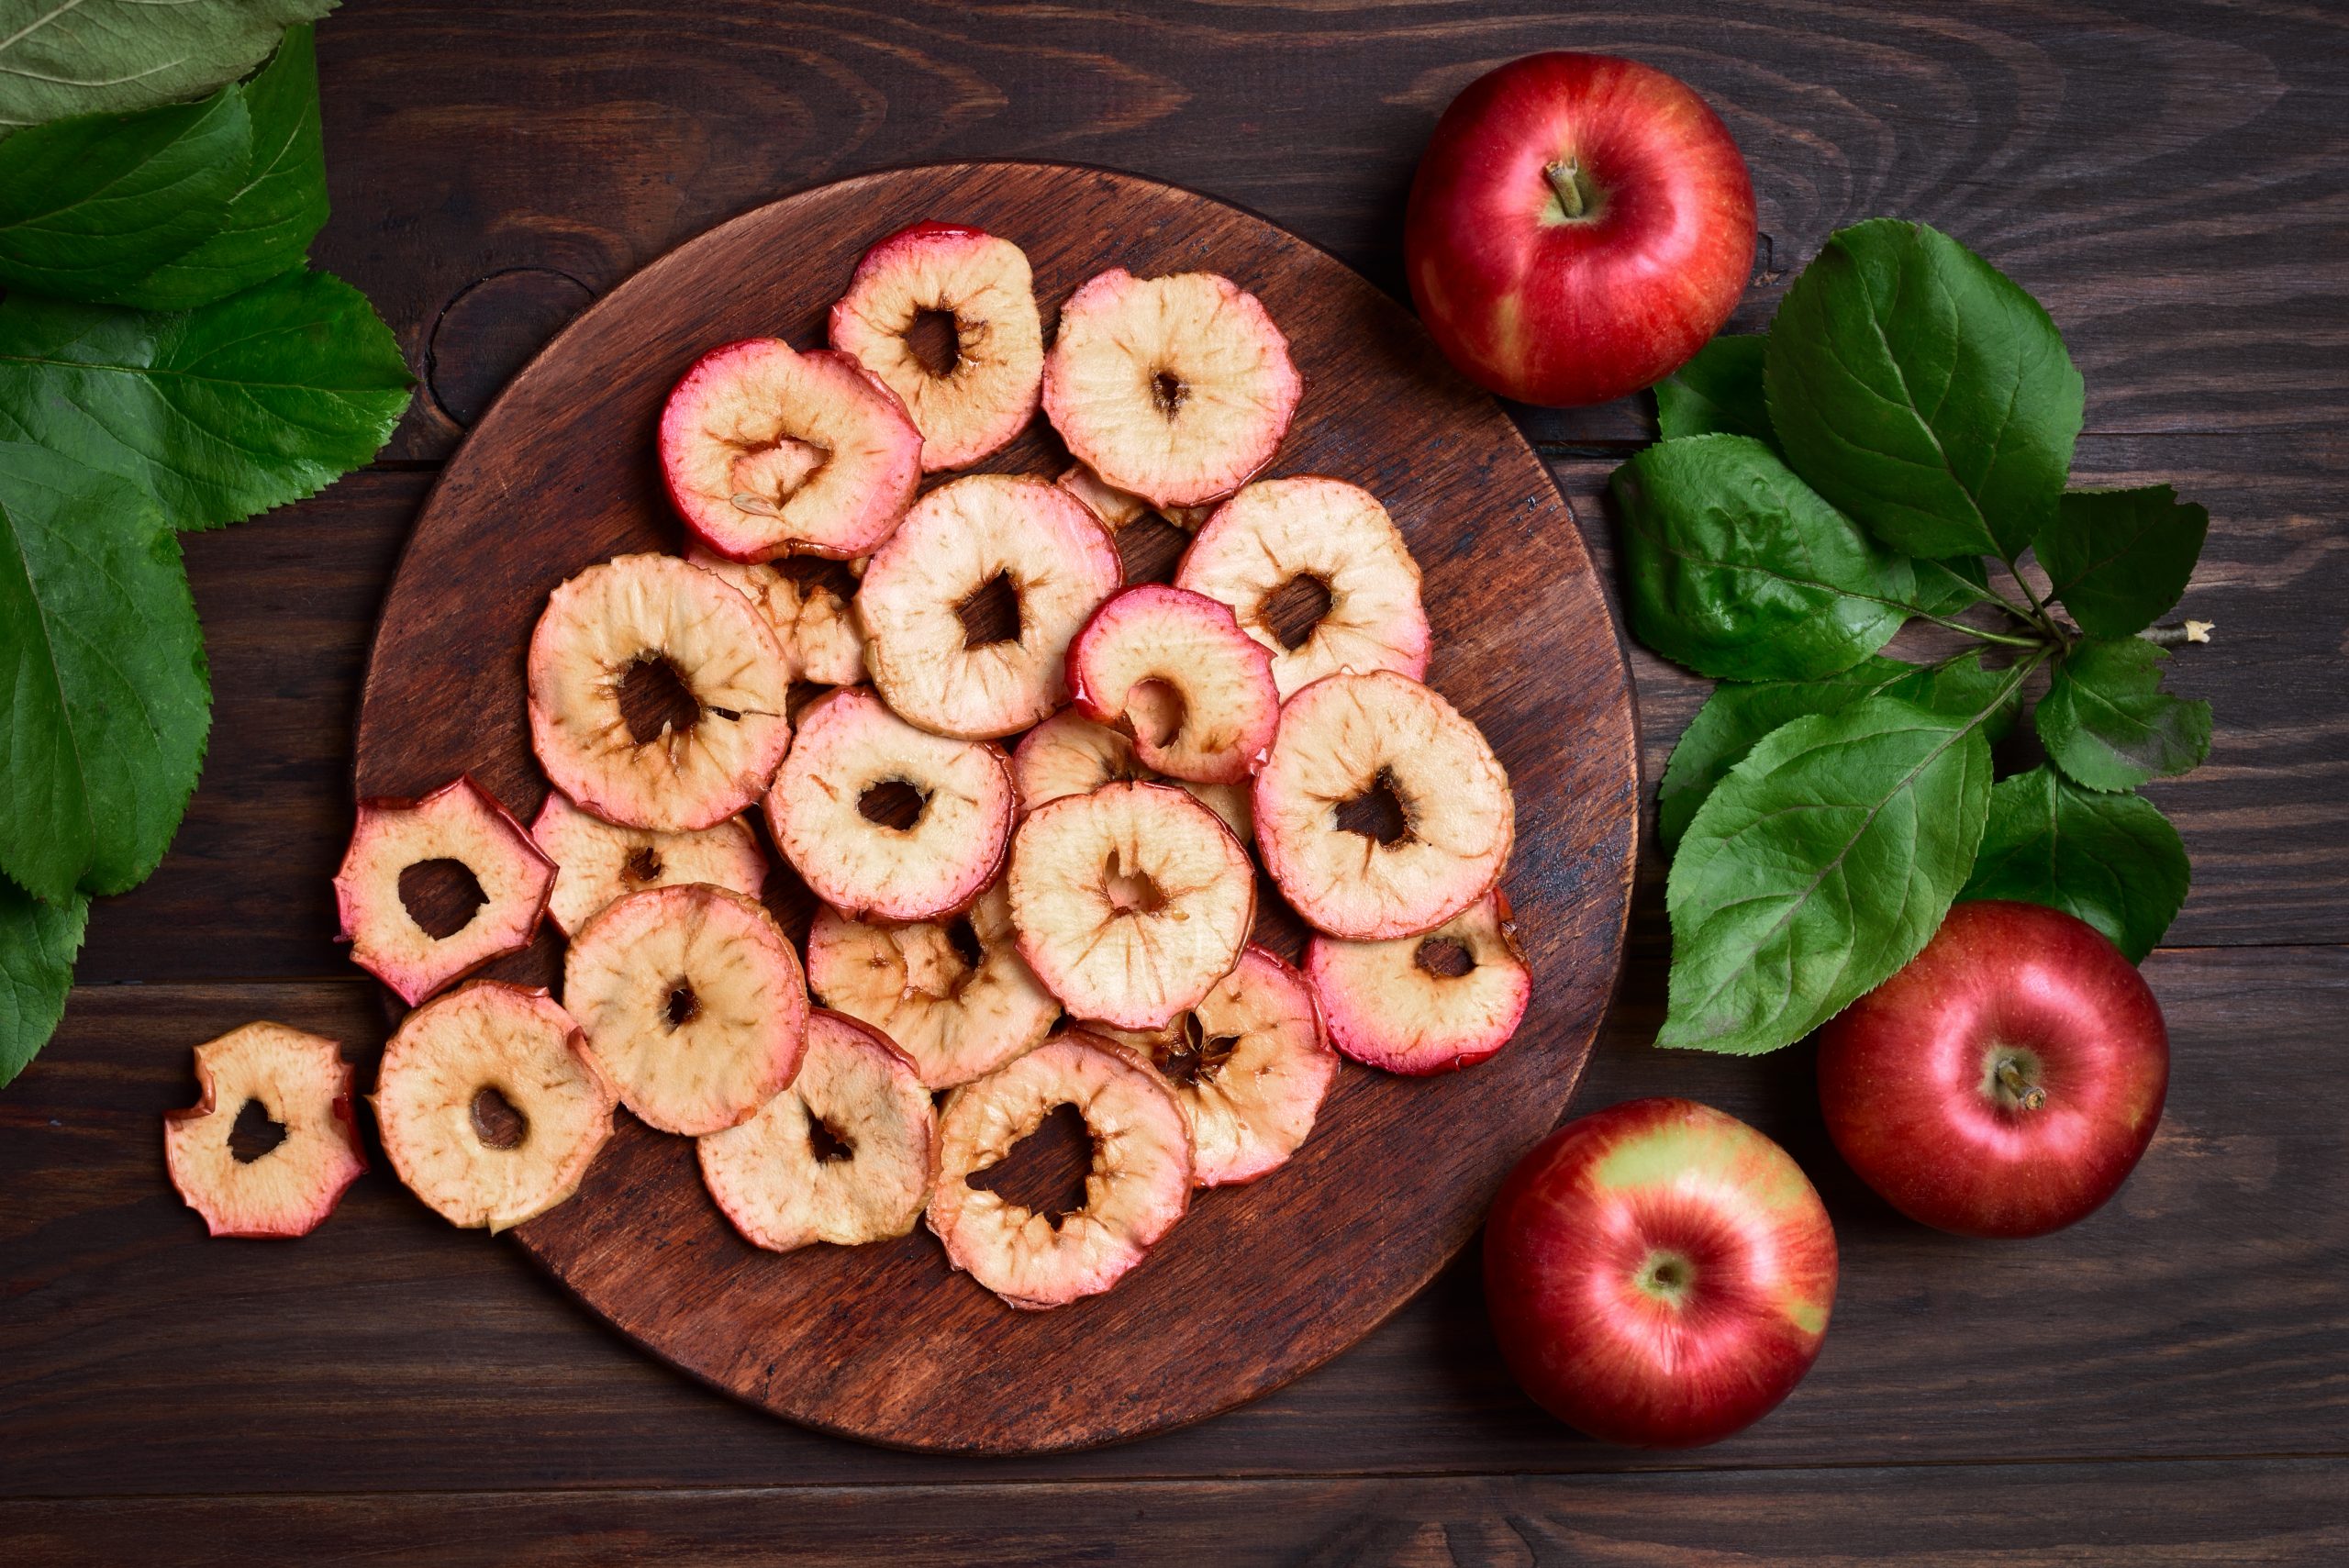 thin slices of apple